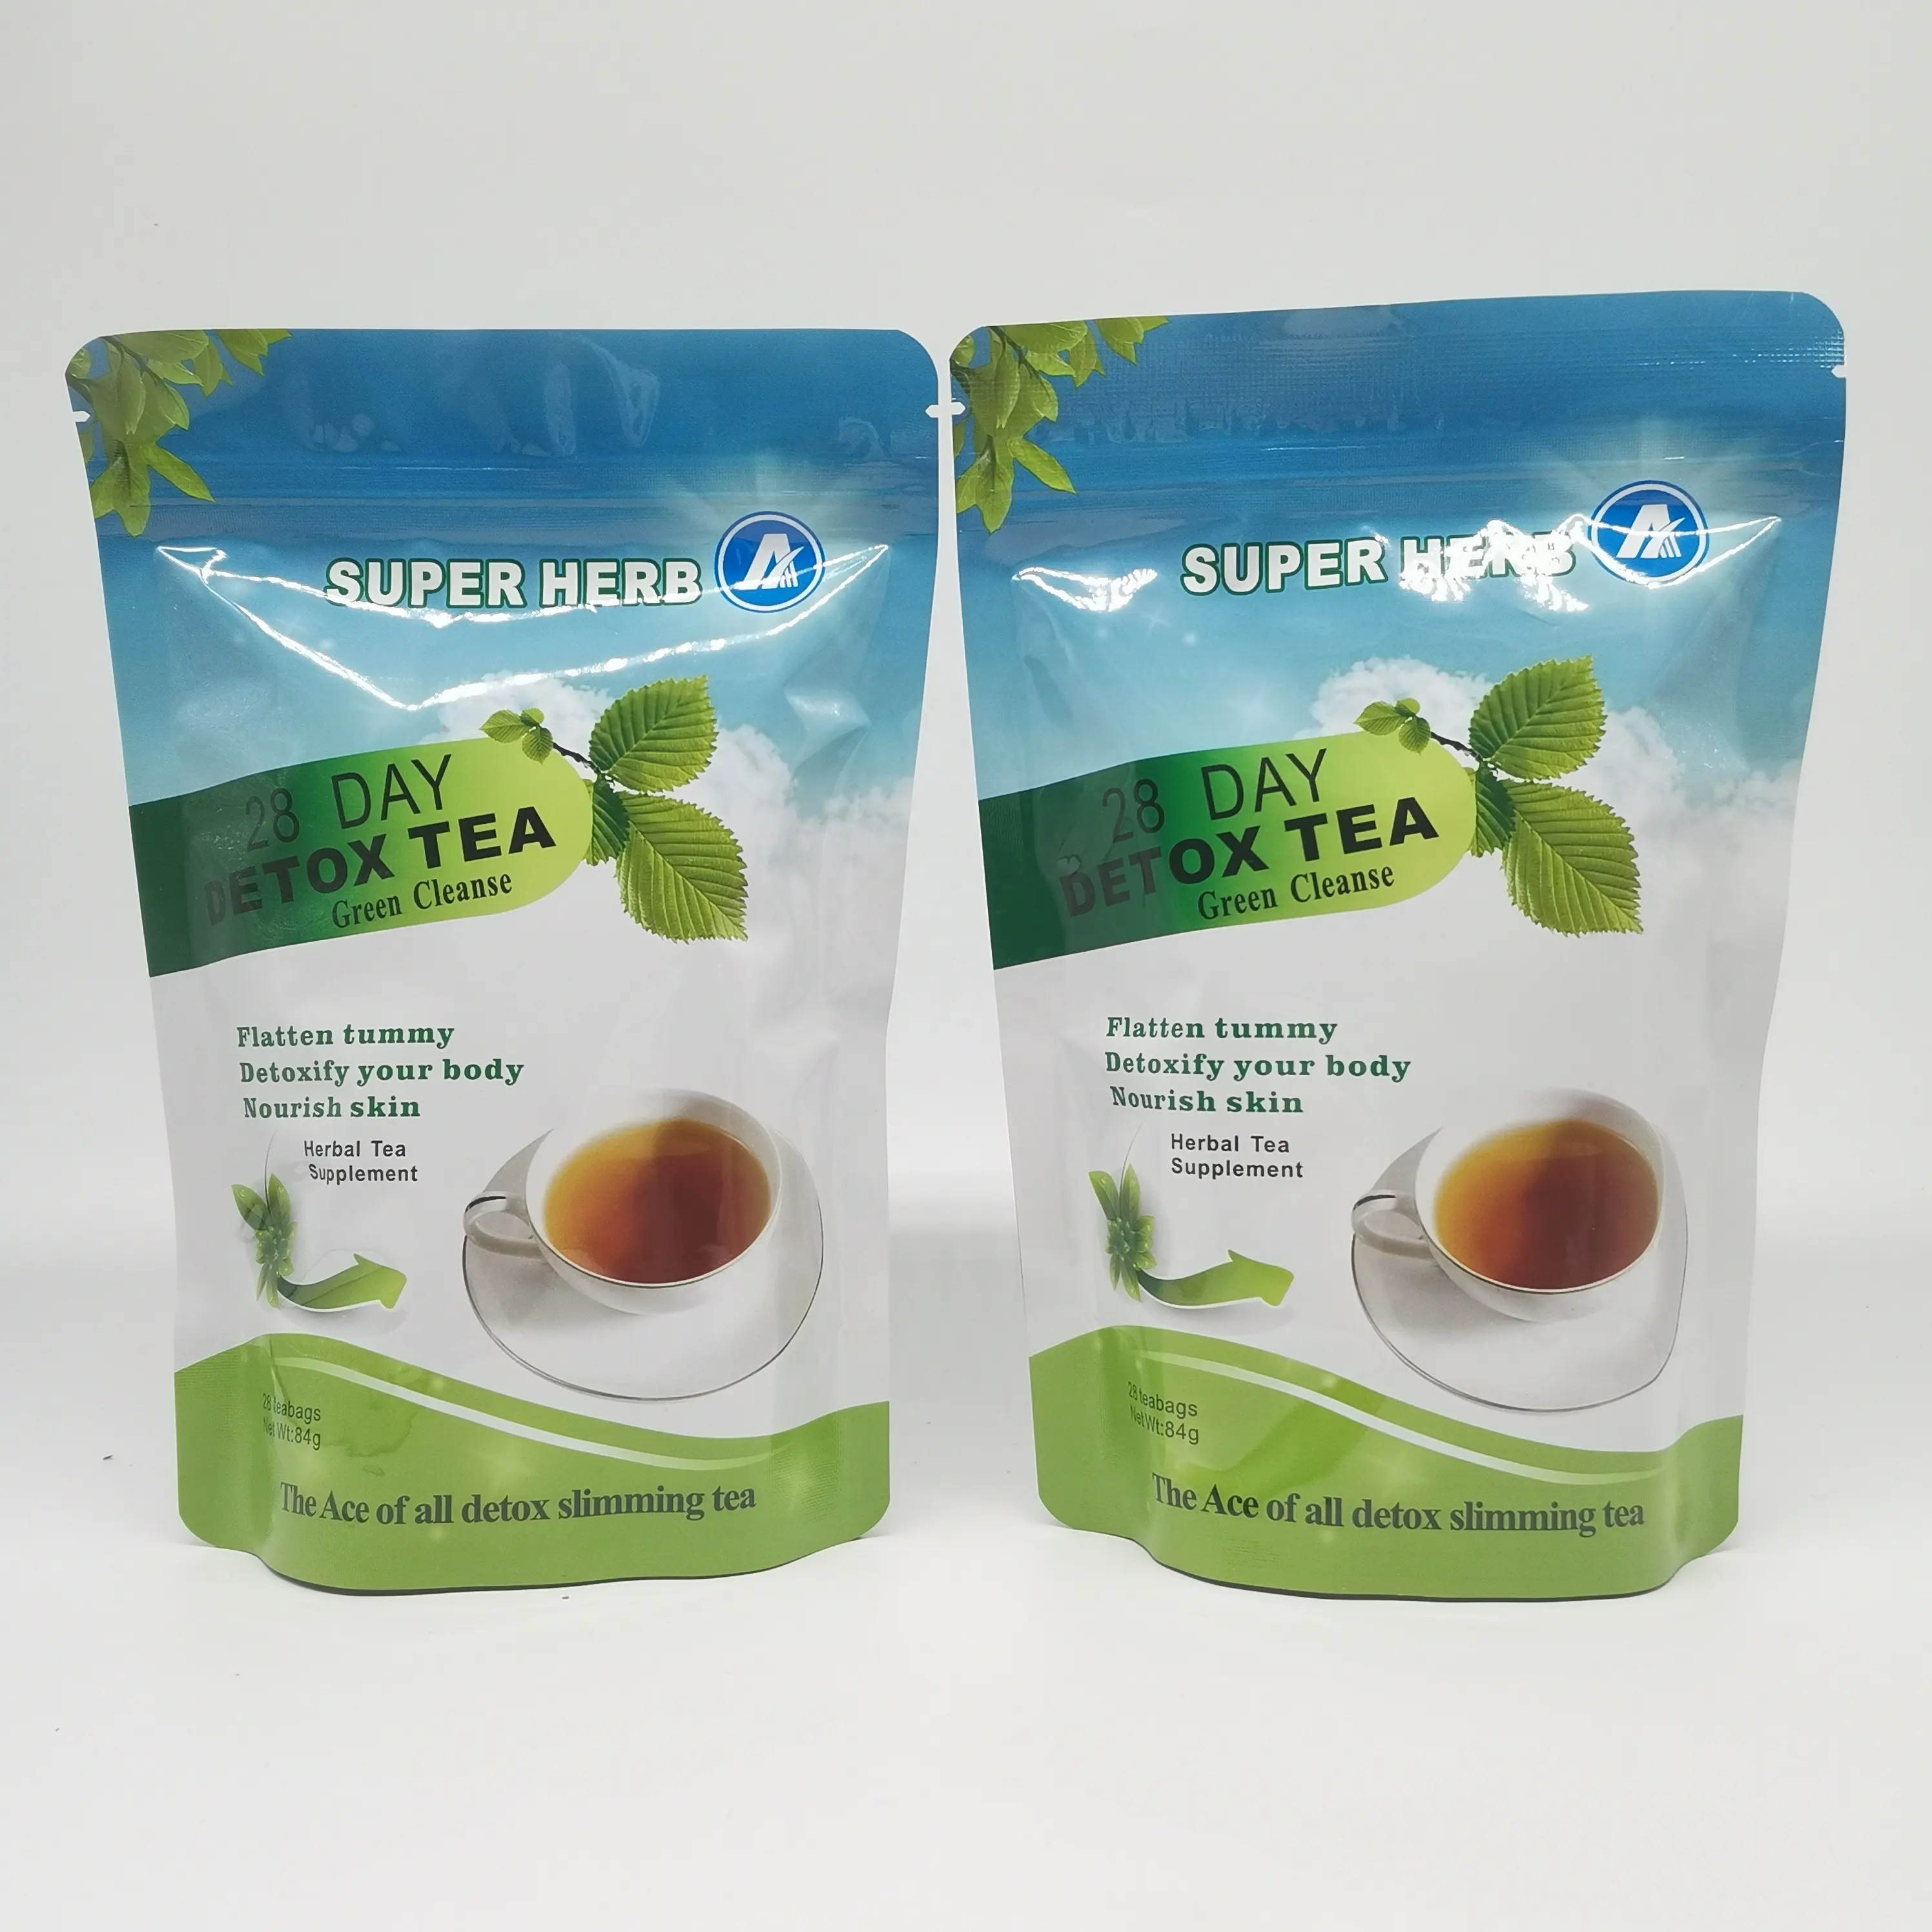 100% Natural Ingredients 28 Day Green Cleanse Tea Tox Herbal Tea Private Label